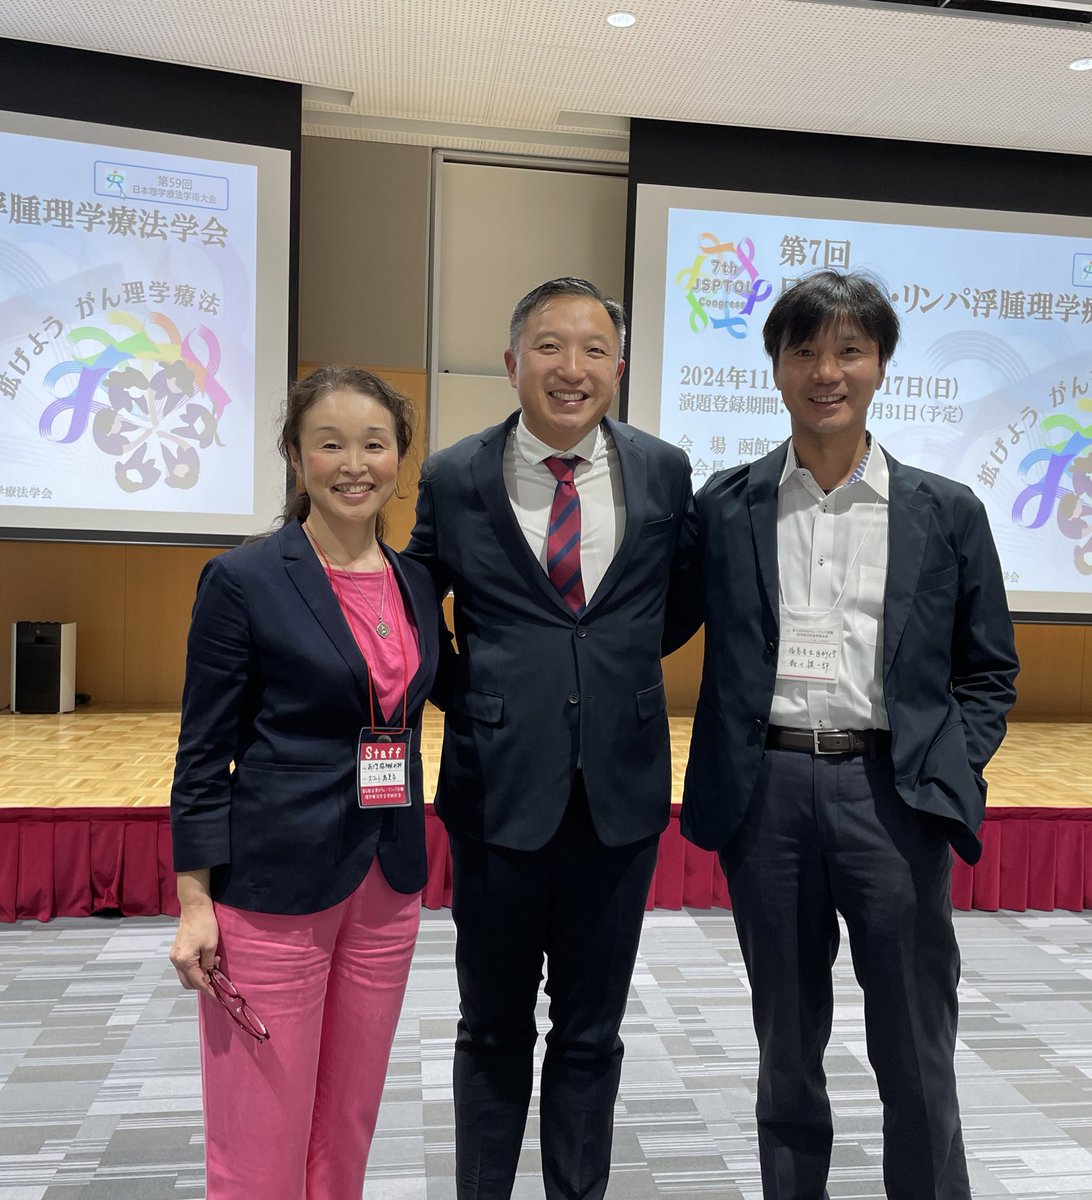 Enjoyed meeting old friends at the 6th Congress of the Japanese Society of Physical Therapy Section on Oncology and Lymphedema in Fukushima City, Japan